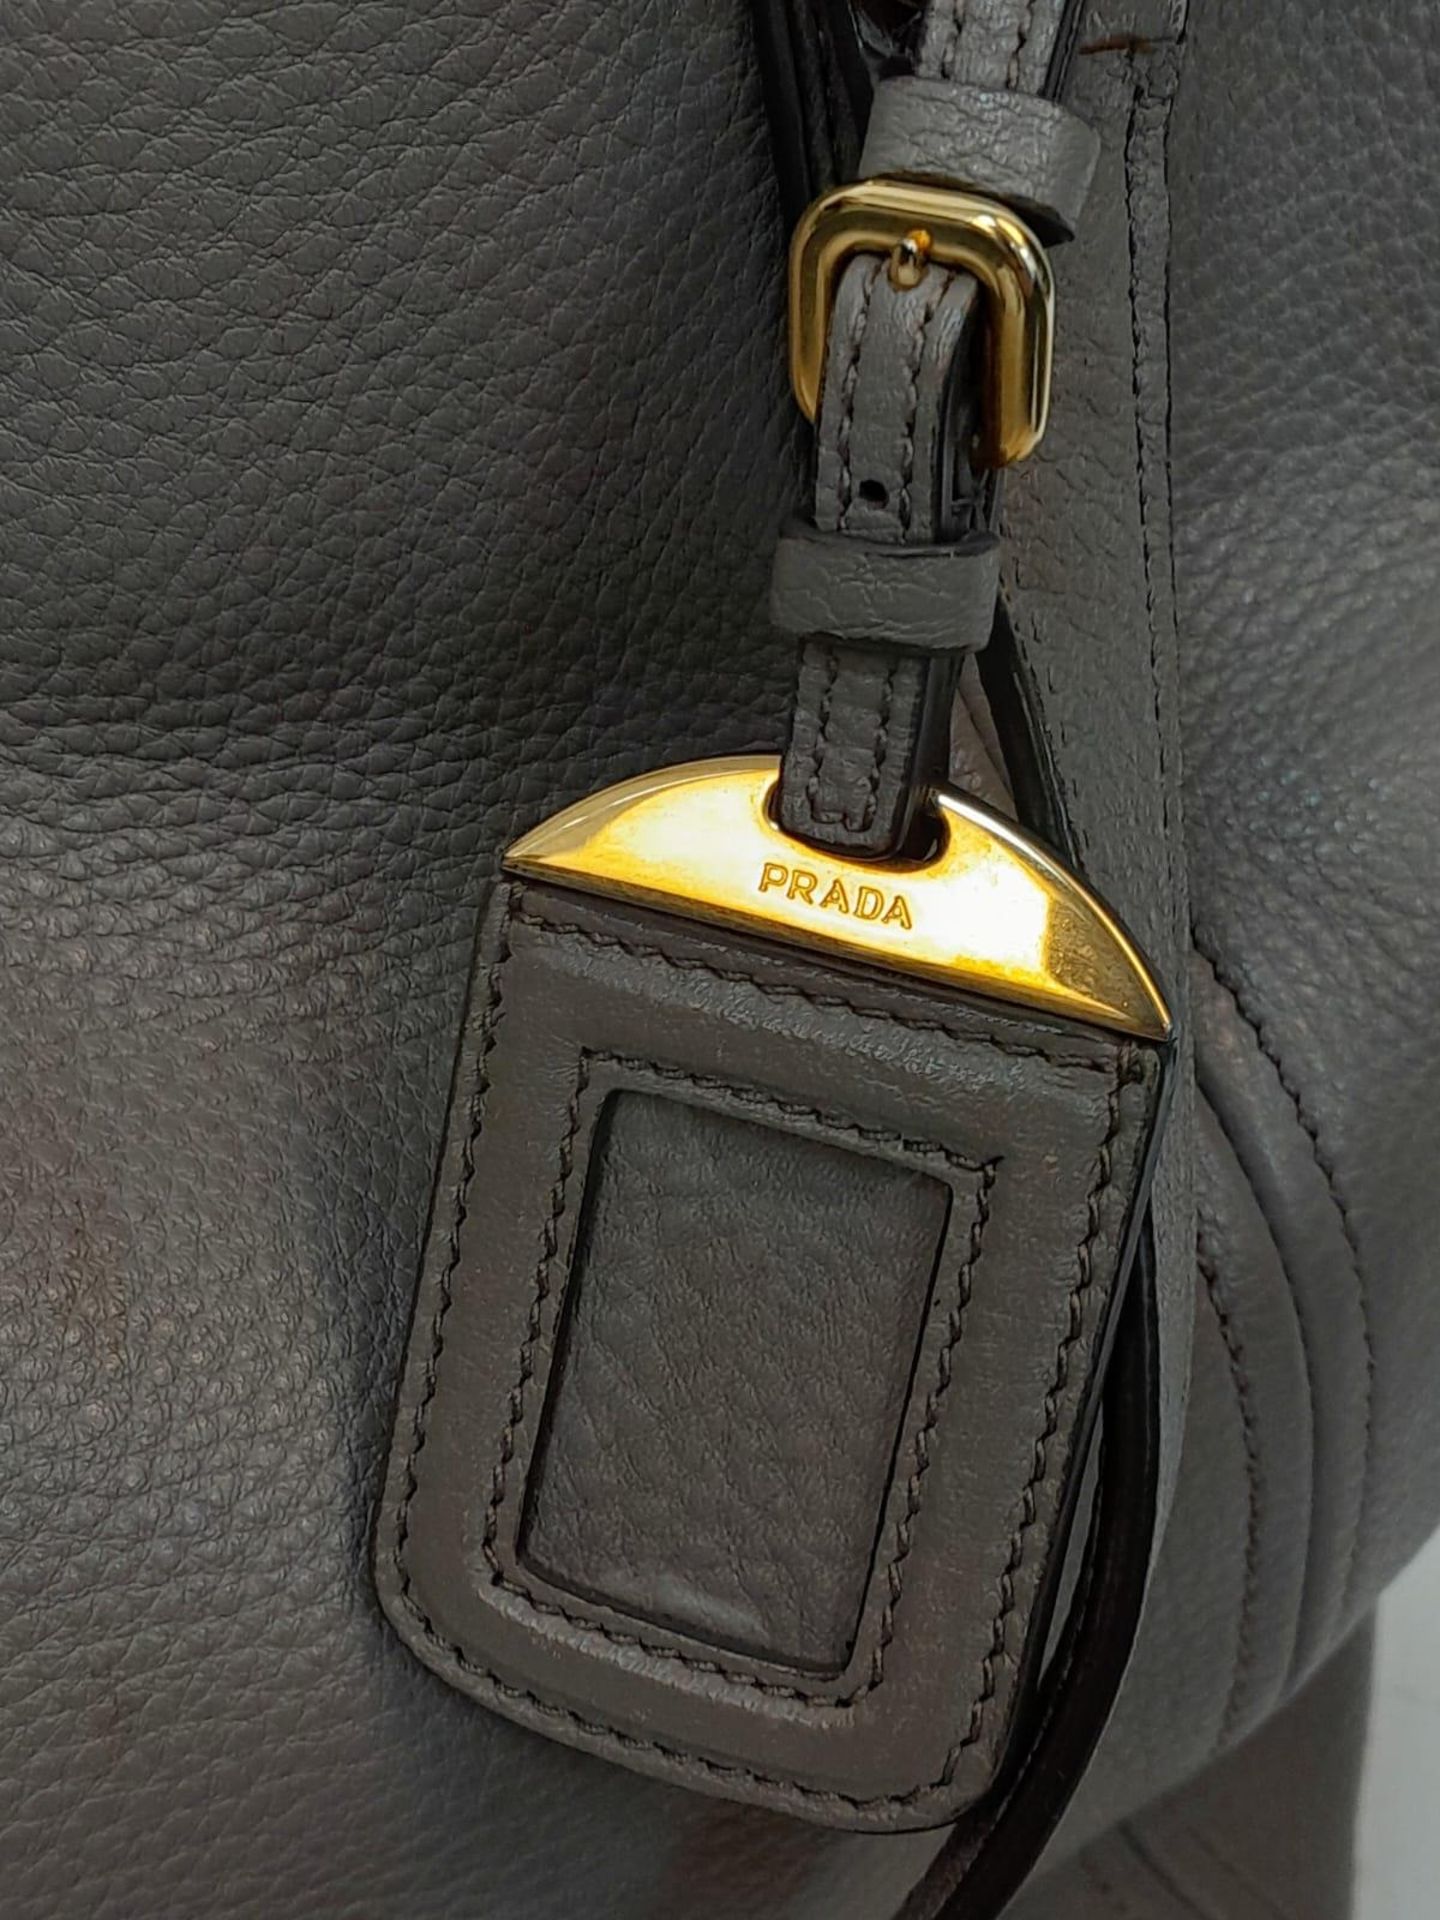 A Prada Grey Leather Shoulder Bag. Textured leather exterior with gold tone hardware. Textile and - Image 6 of 9